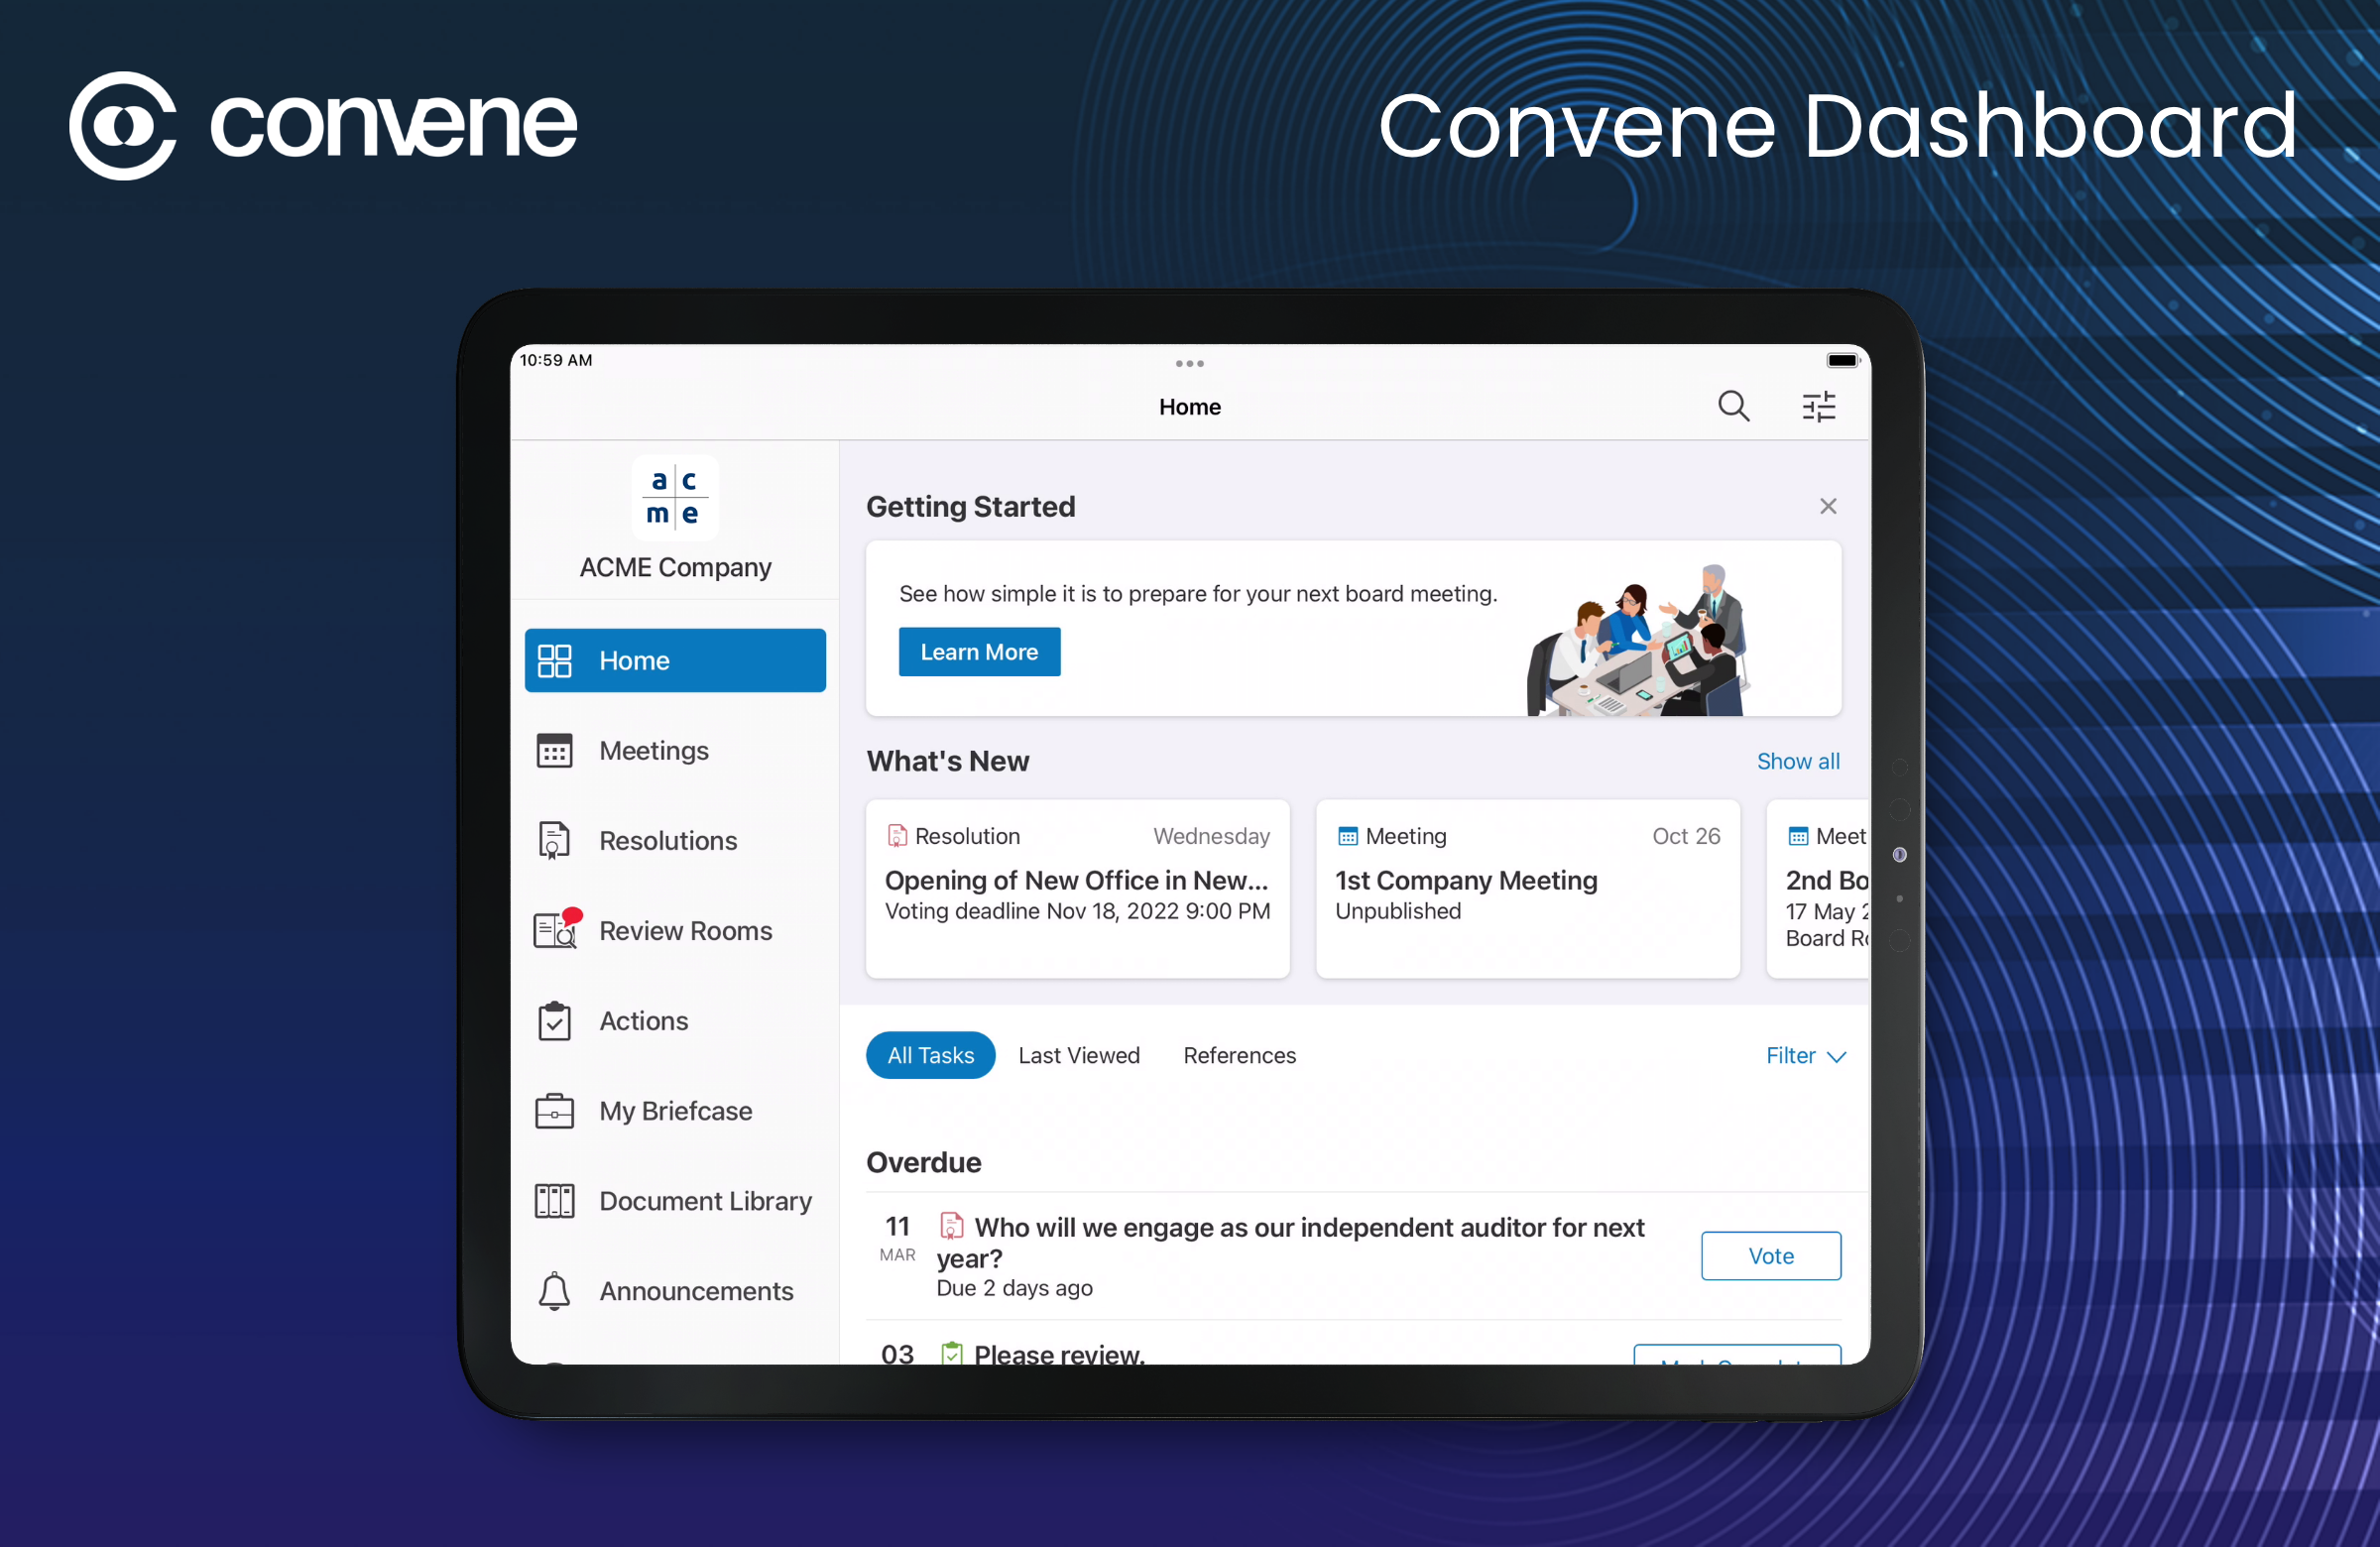 Instantly access all upcoming board meetings, with all related action items and documents available at-a-glance to drive smarter decision-making.